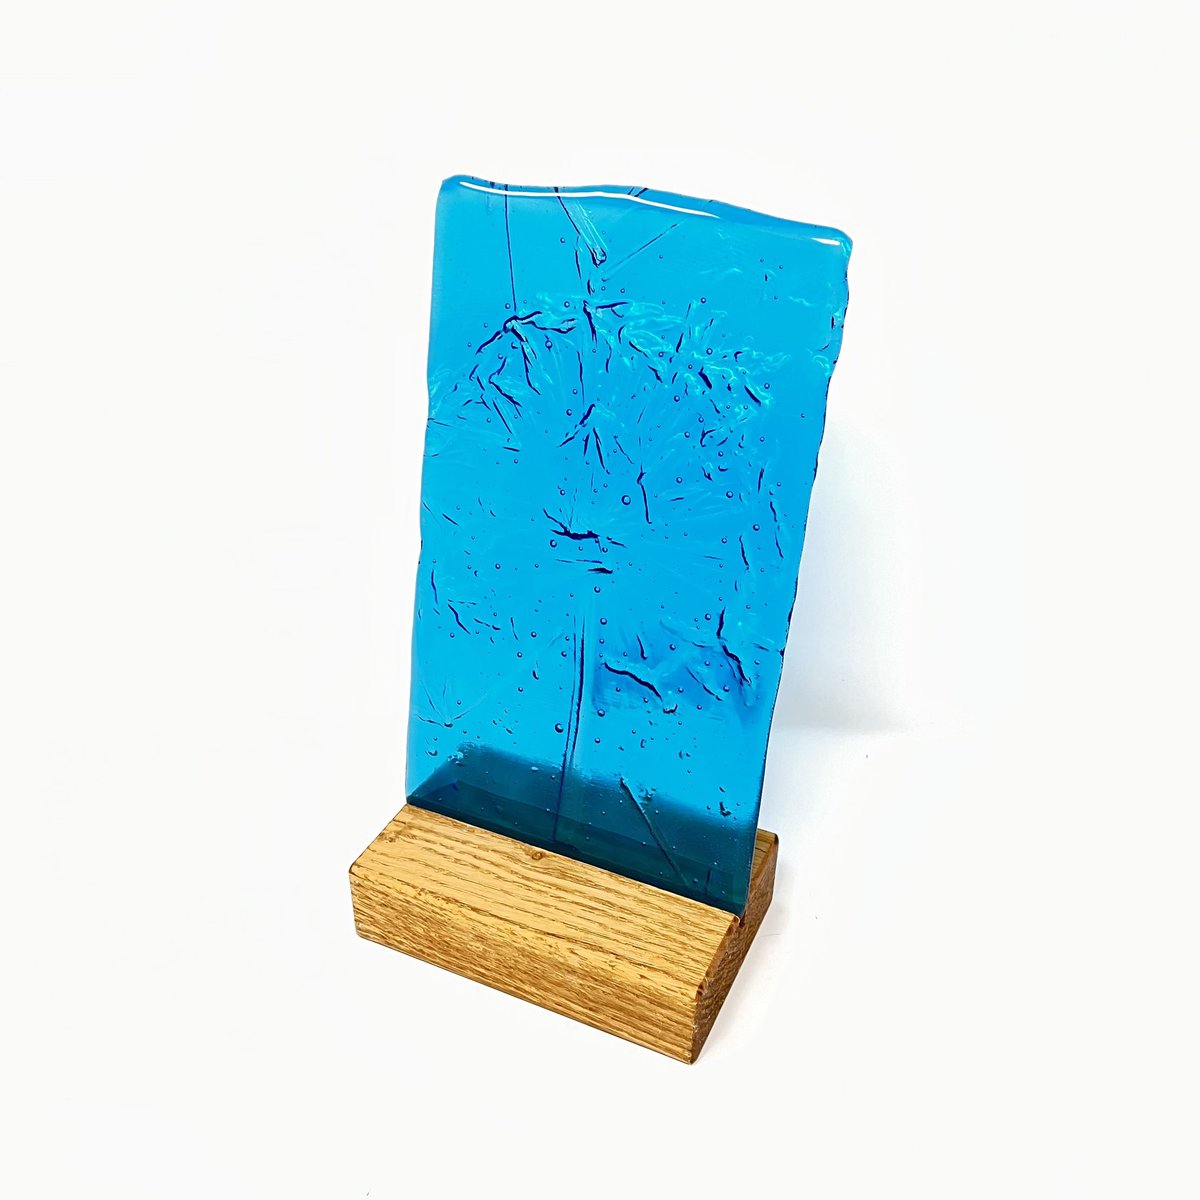 Agapanthus Block by Hilary Shields Iridised glass with hollow relief of a single agapanthus set in an oak block. Ideal for a candle or sunny window sill #agapanthusflower #supportlocalbusiness #tonbridgehighstreet #summer #inspiredbynature #artforthehome #botanicalart